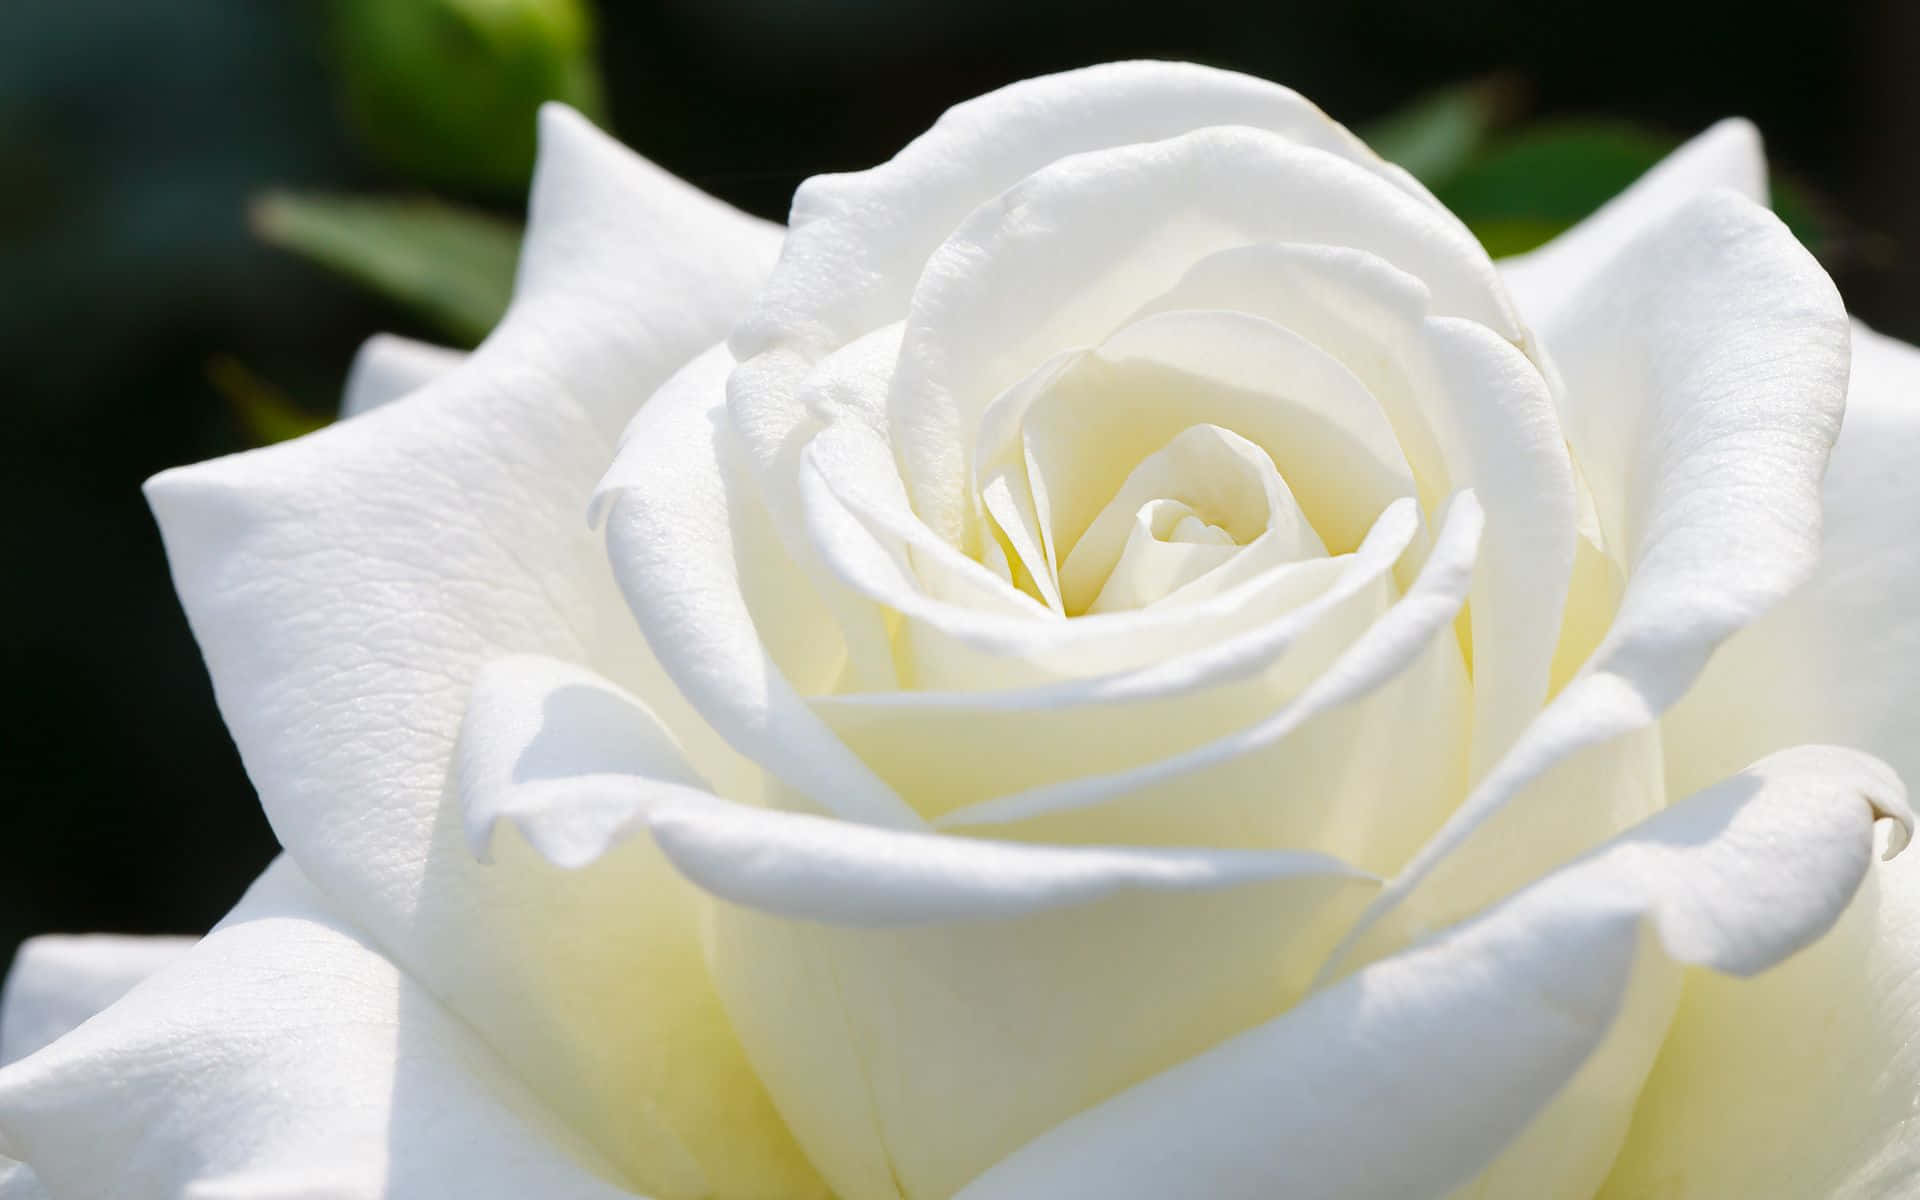 A Beautiful White Rose Showing Its Delicate Petals